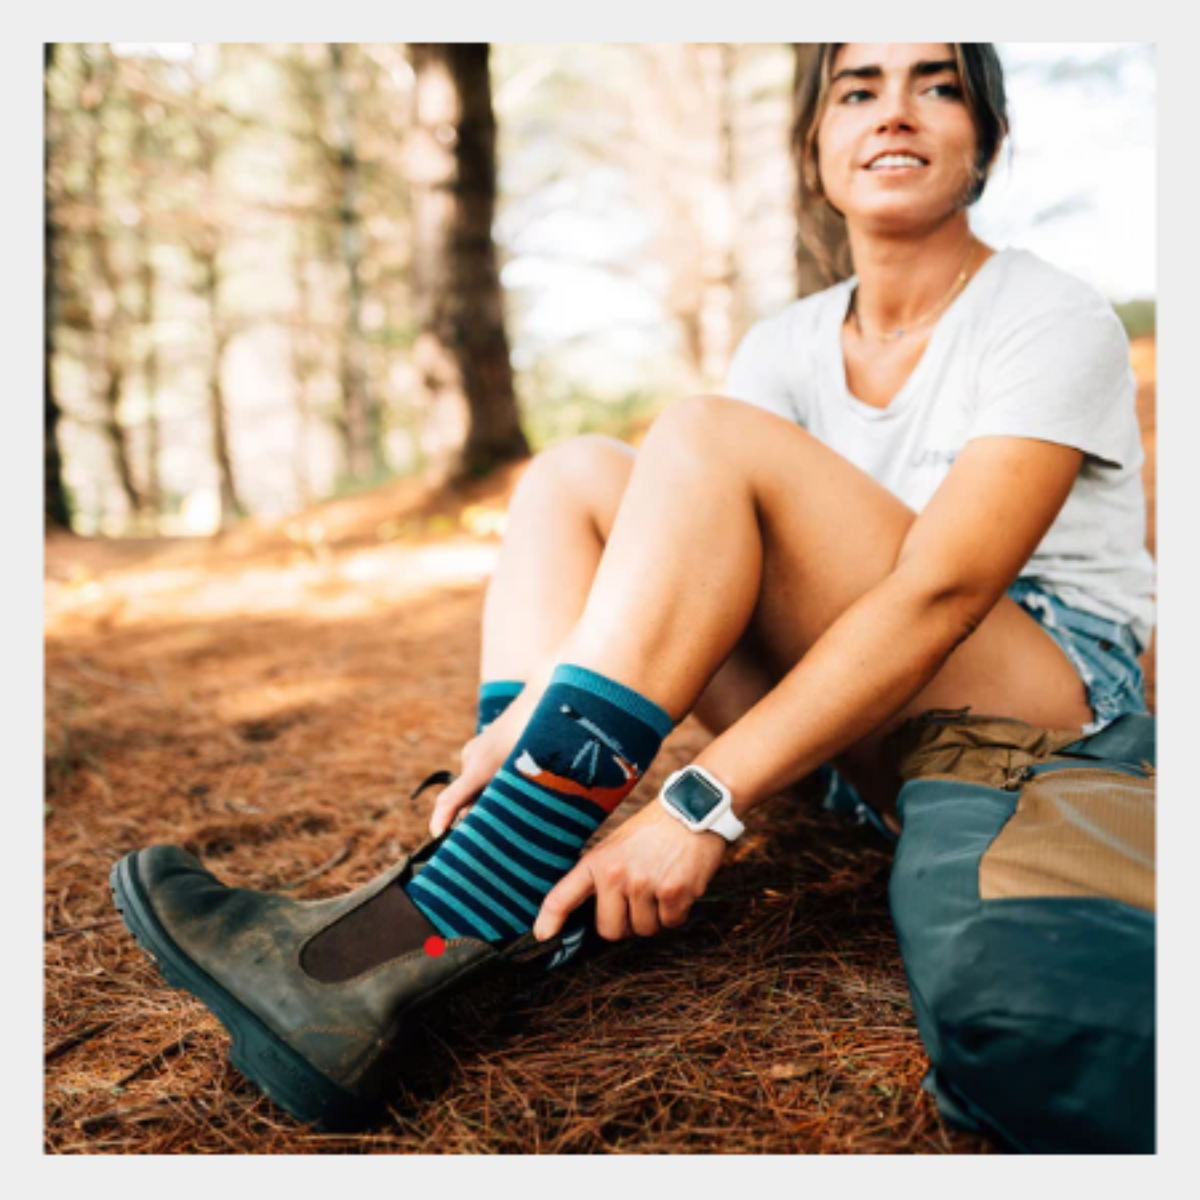 Darn Tough 6037 Animal Haus Lightweight Cushion Crew women&#39;s sock featuring navy blue sock with teal stripes and stars at top. Sock shown on model in the woods.. 